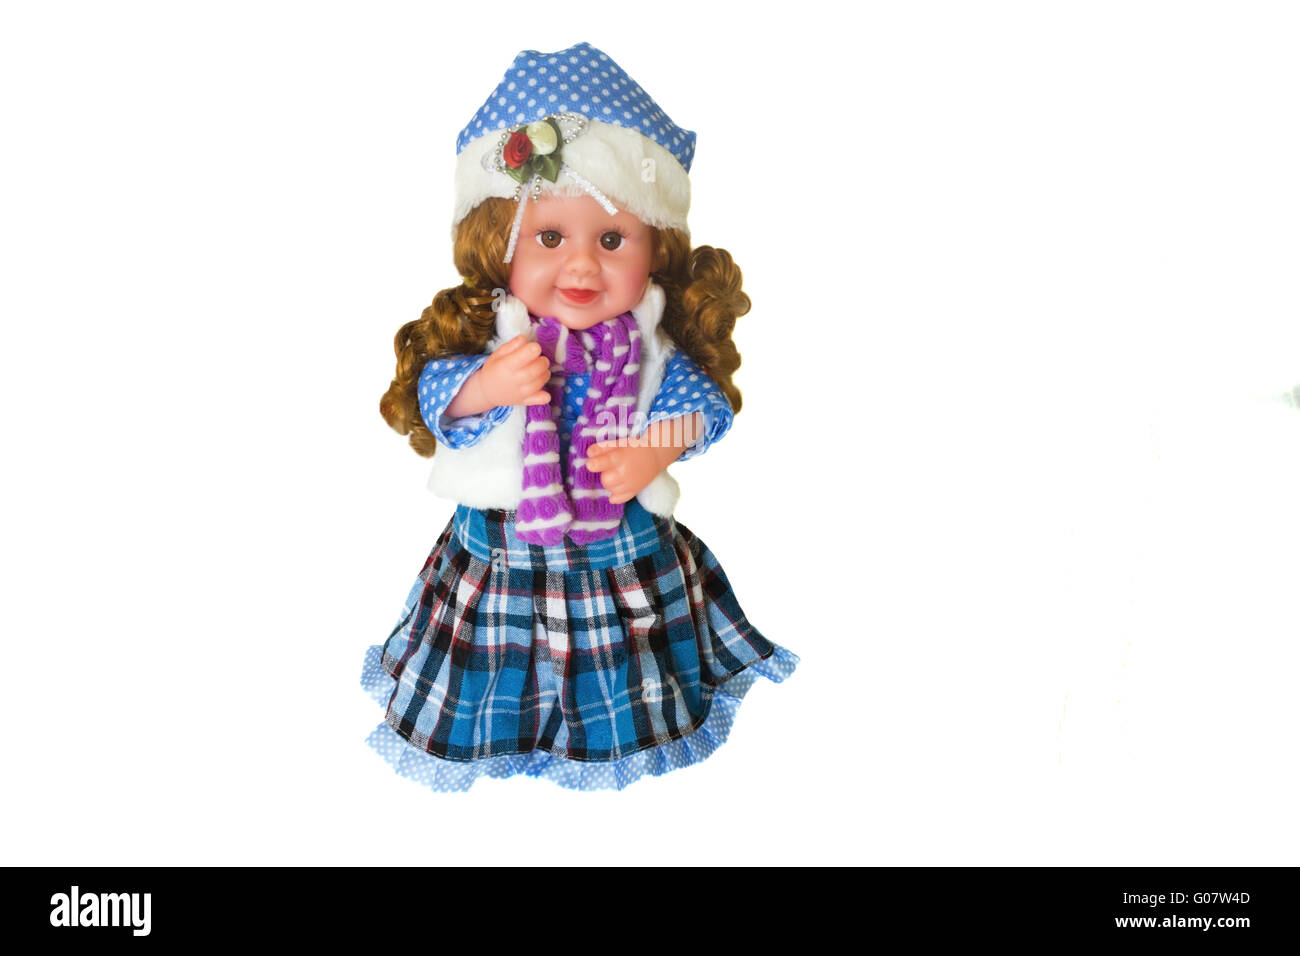 Toy for children - beautiful doll on a white backg Stock Photo